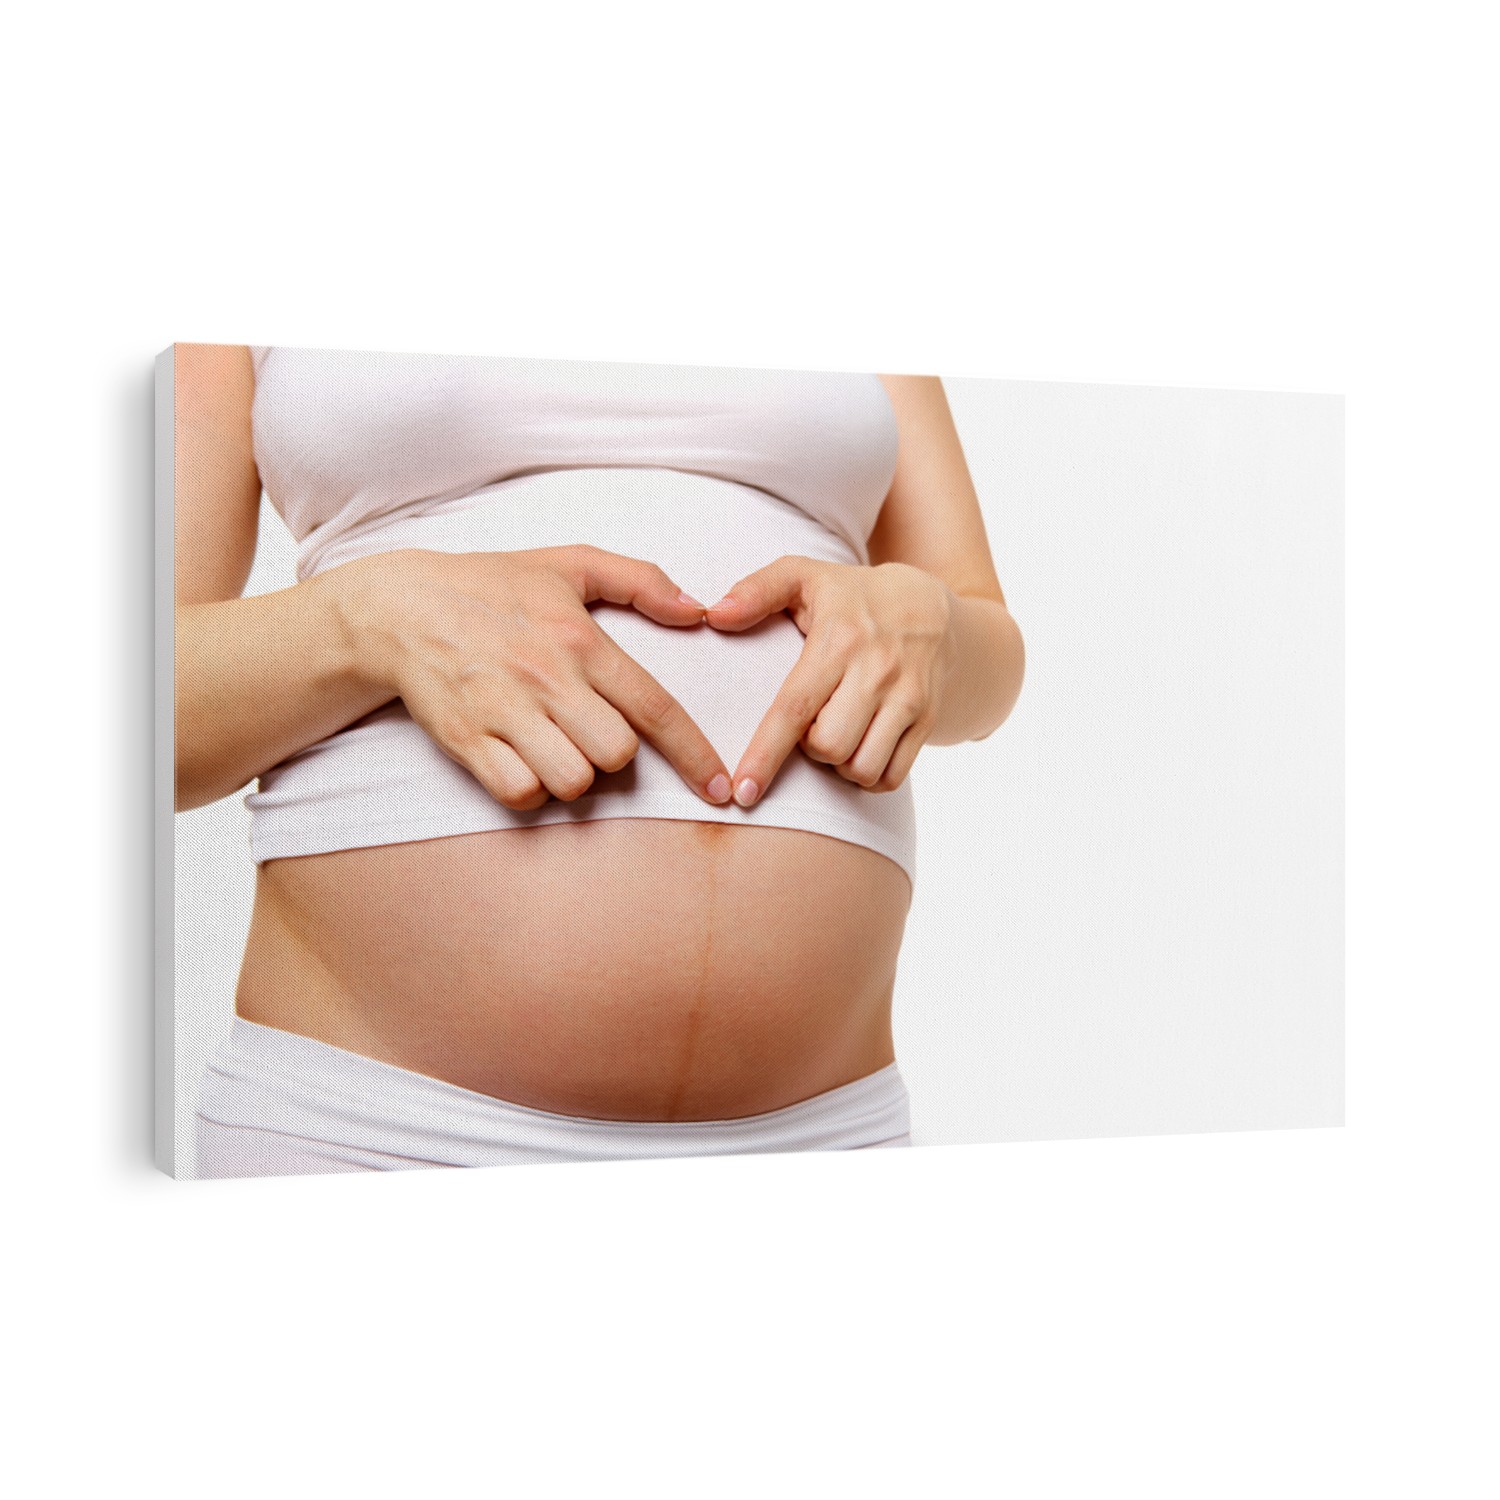 Image of pregnant woman belly with heart made up of fingers